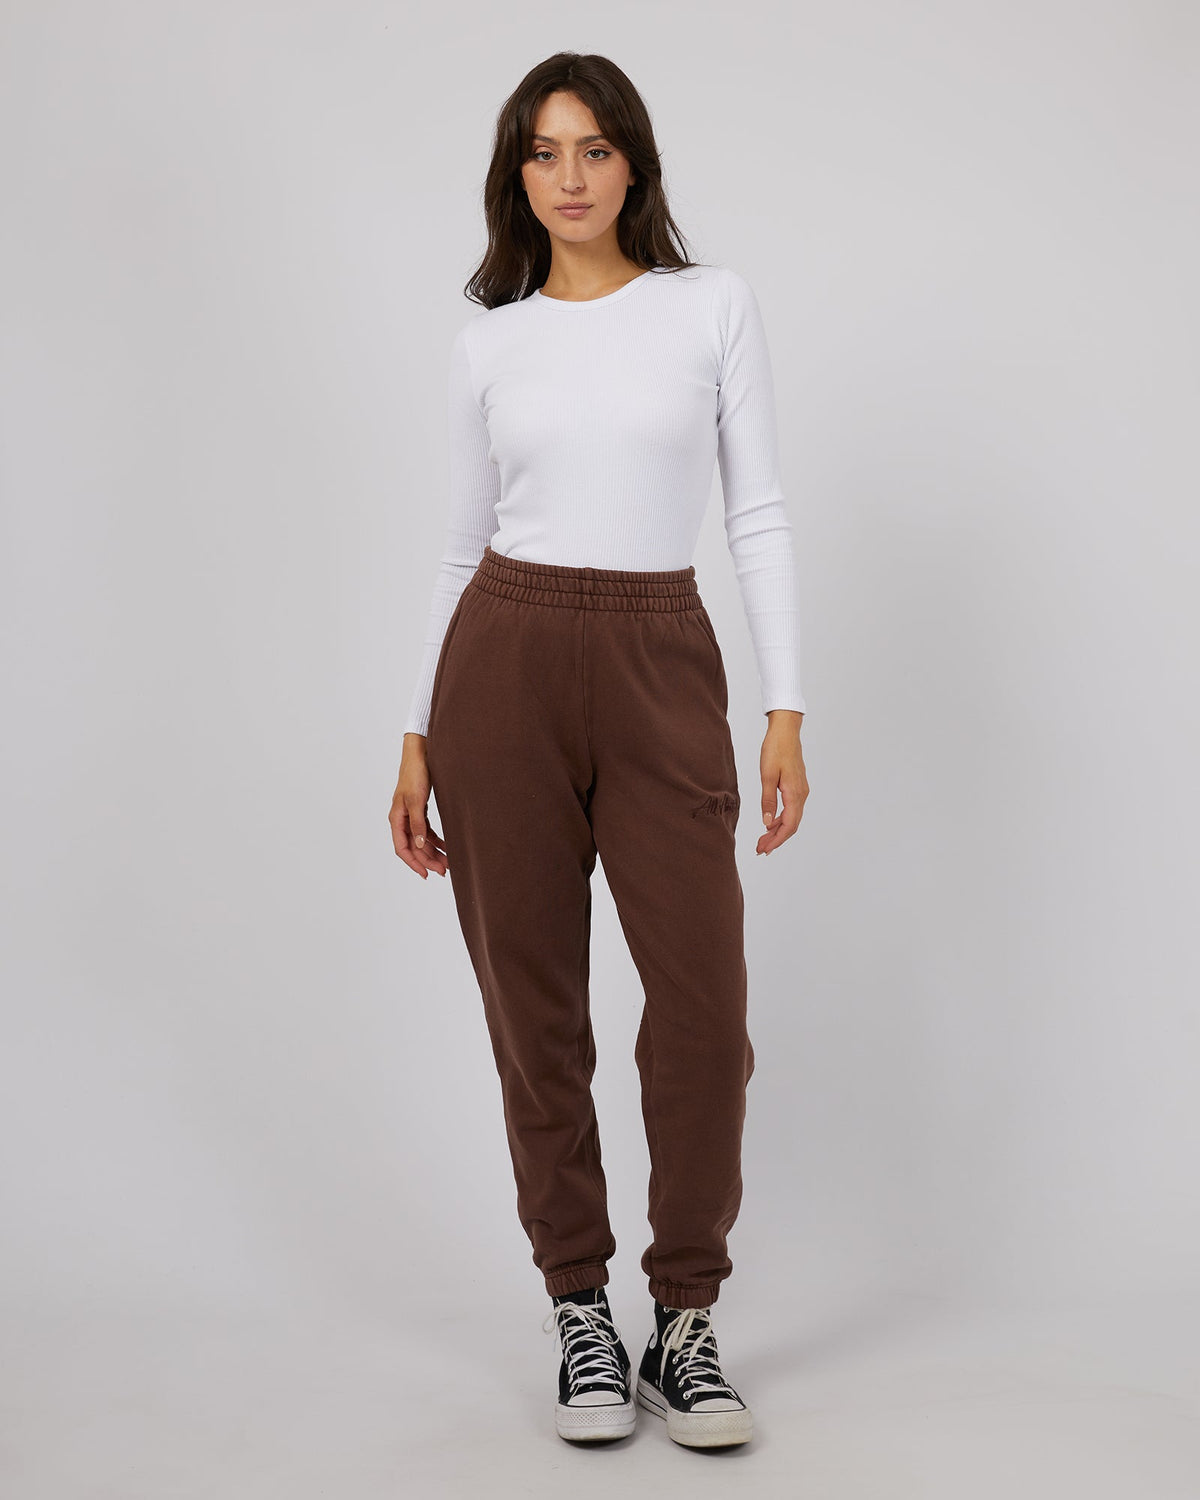 All About Eve-Classic Trackpant Brown-Edge Clothing